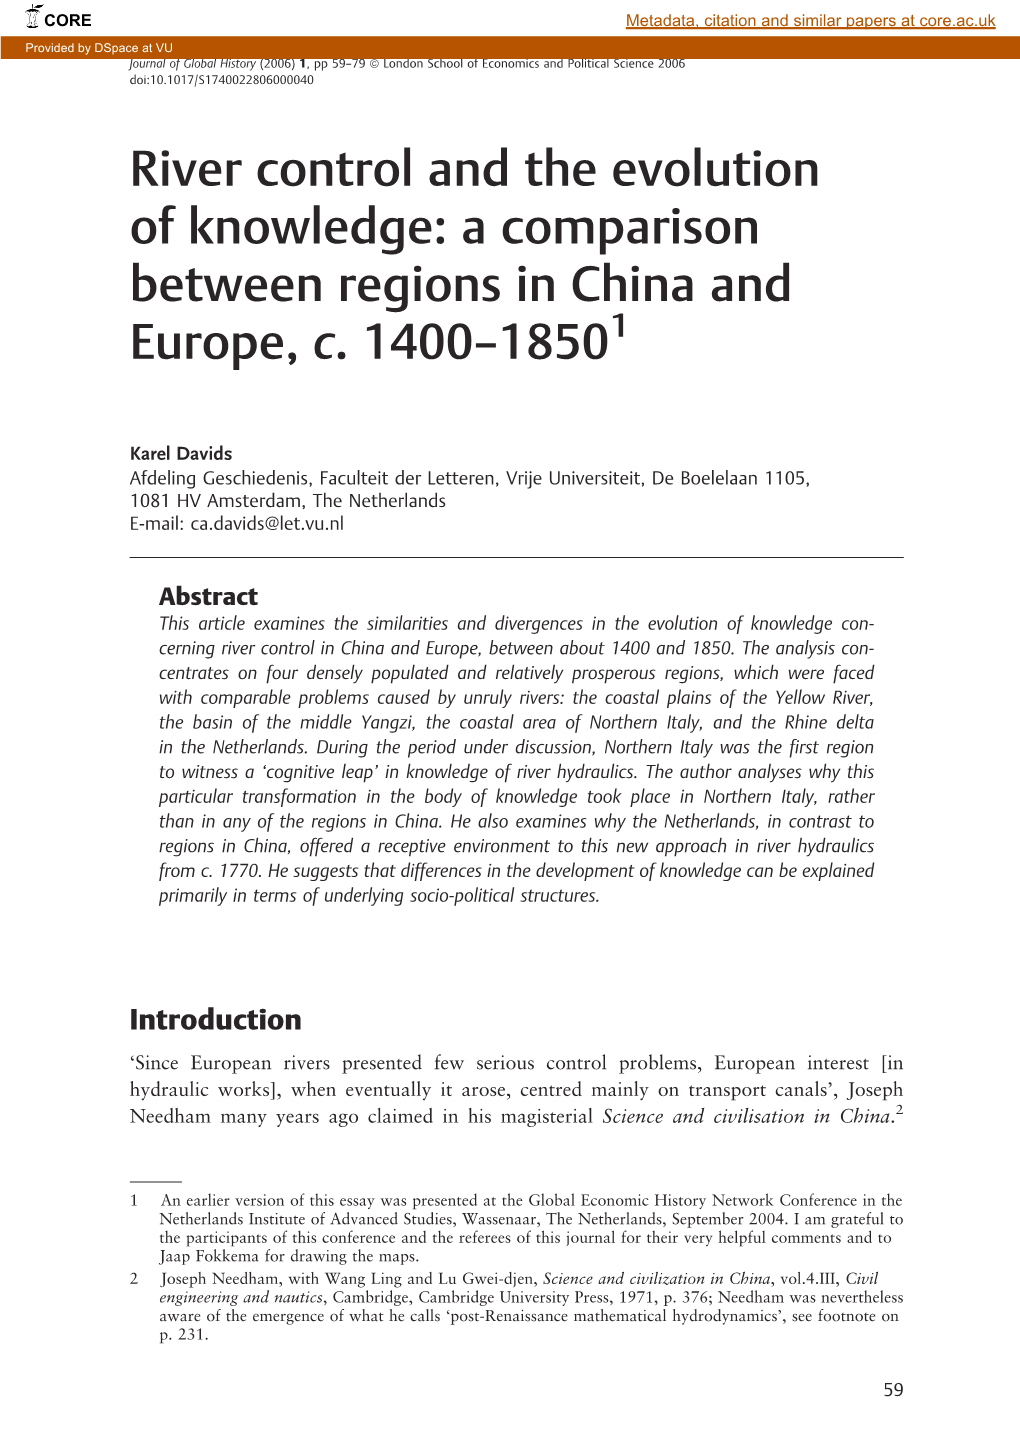 A Comparison Between Regions in China and Europe, C. 1400&#8211